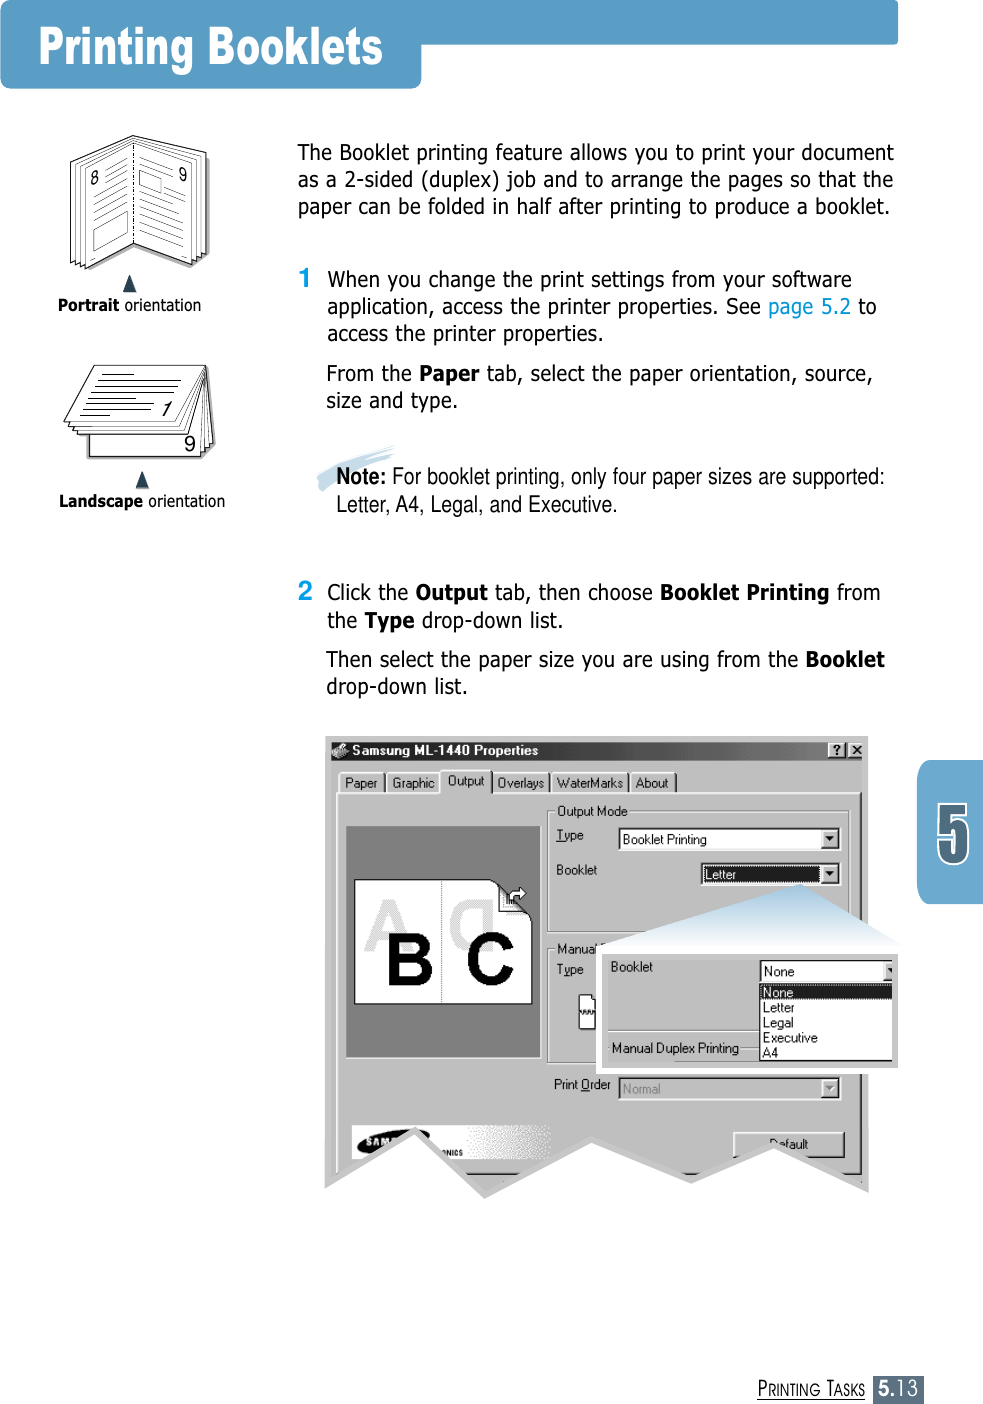 5.13PRINTING TASKS➐➐➐➐Portrait orientationPrinting Booklets89➐➐➐➐Landscape orientation719The Booklet printing feature allows you to print your documentas a 2-sided (duplex) job and to arrange the pages so that thepaper can be folded in half after printing to produce a booklet. 1When you change the print settings from your softwareapplication, access the printer properties. See page 5.2 toaccess the printer properties.From the Paper tab, select the paper orientation, source,size and type.2Click the Output tab, then choose Booklet Printing fromthe Type drop-down list. Then select the paper size you are using from the Bookletdrop-down list.Note: For booklet printing, only four paper sizes are supported:Letter, A4, Legal, and Executive.